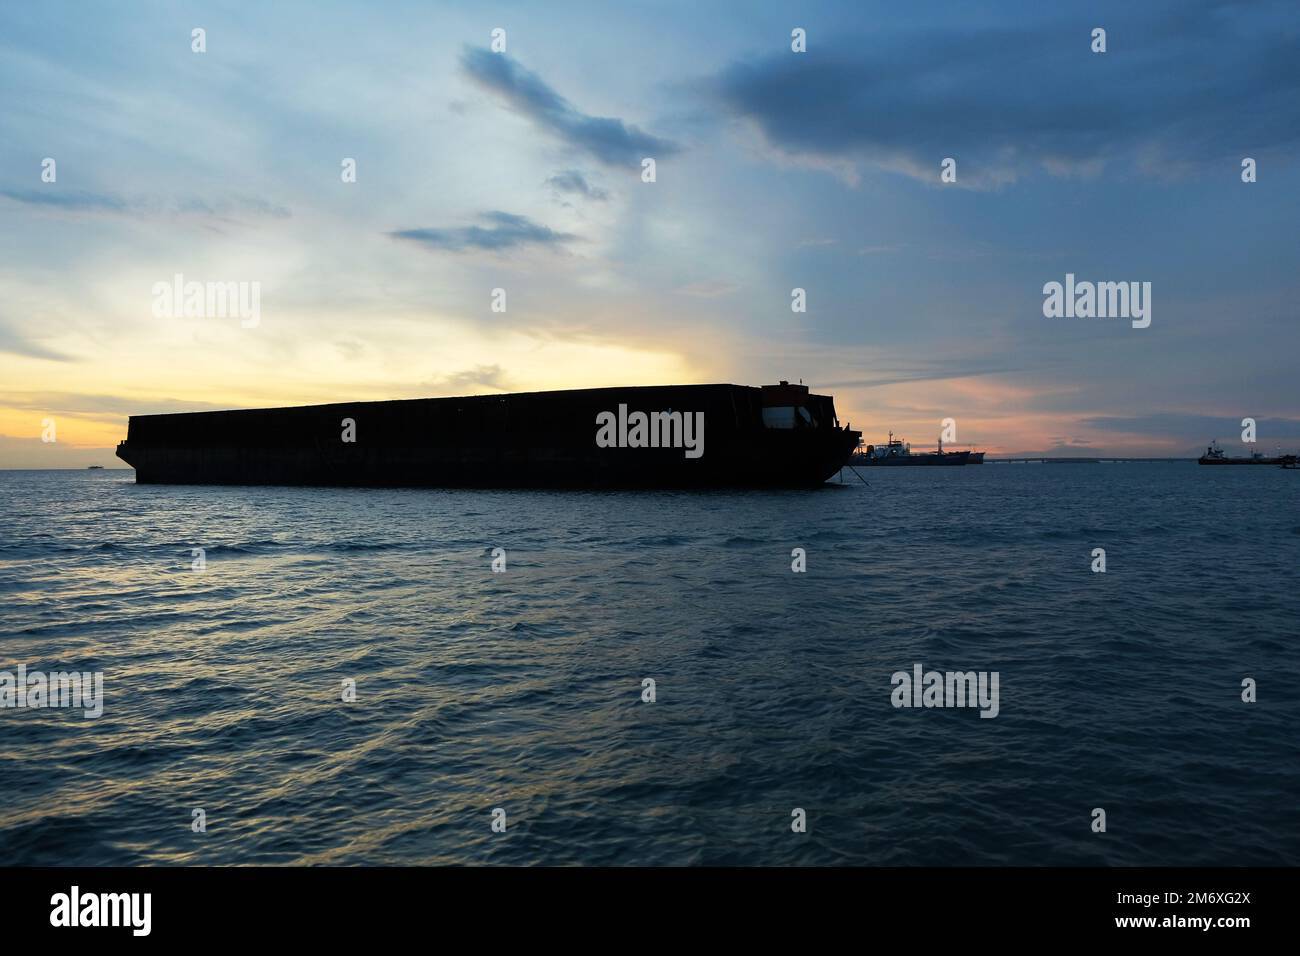 The dark silhouette of a barge in the sea against a light background of the rising sun. Sky view with boat shadow Stock Photo